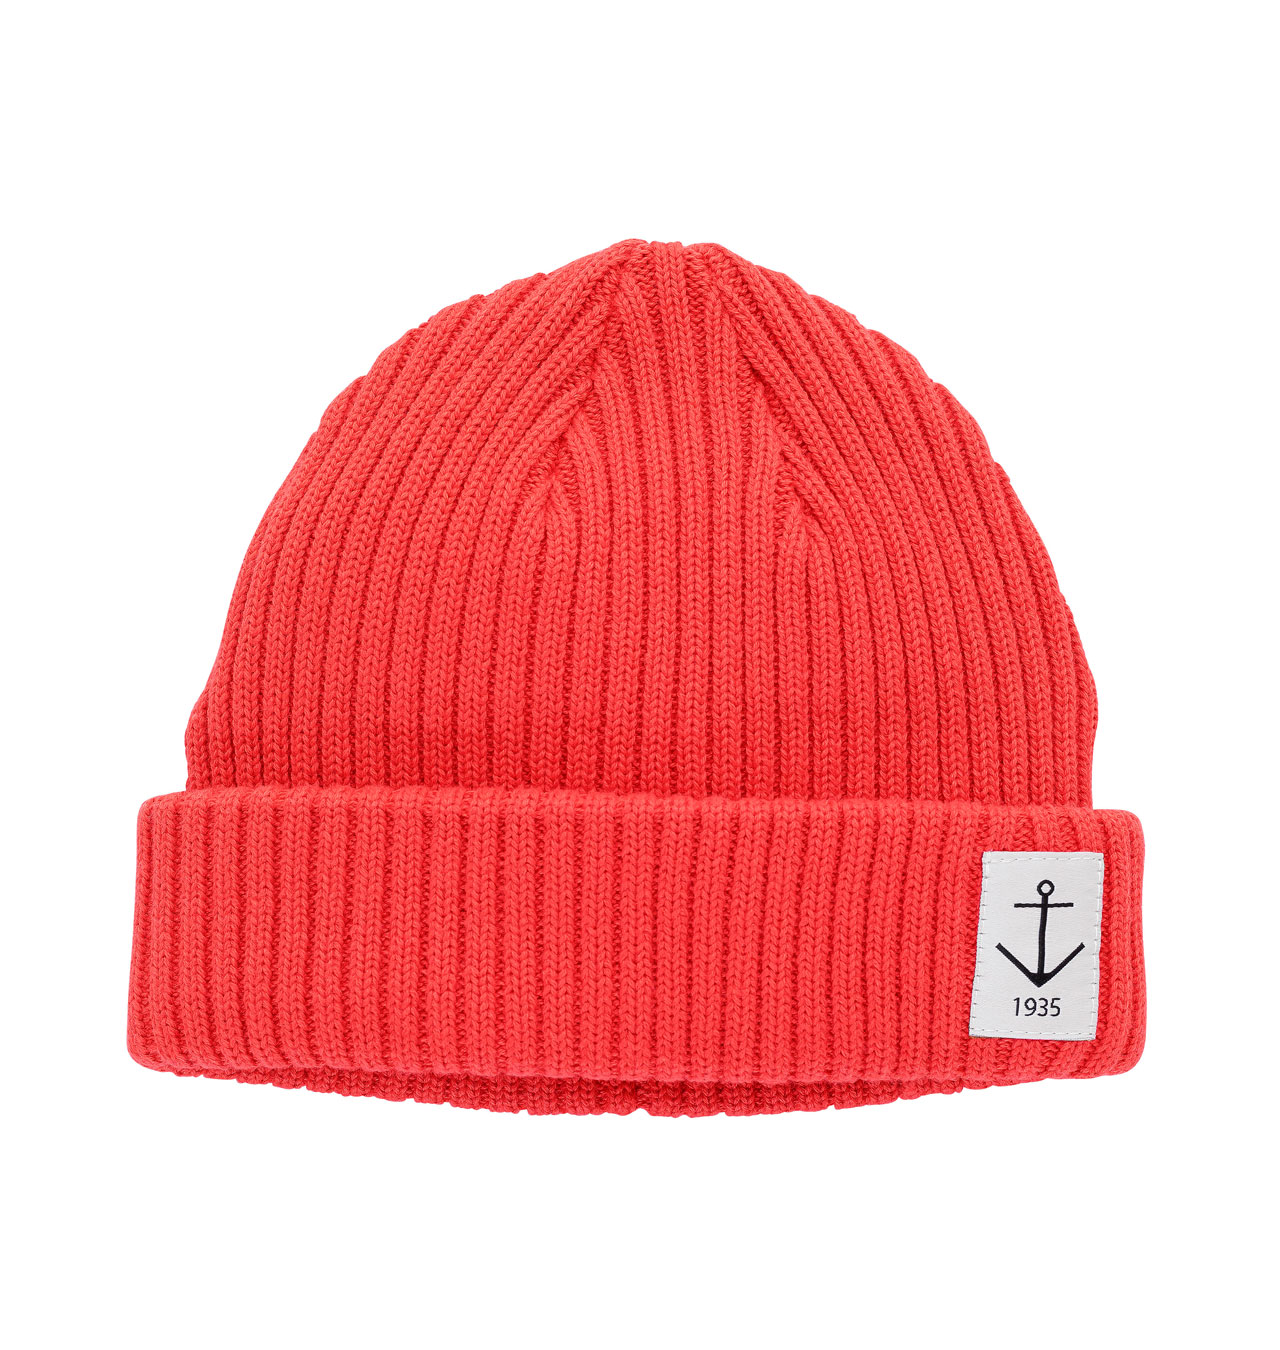 Resterods---Smula-Anchor-Beanie---red3